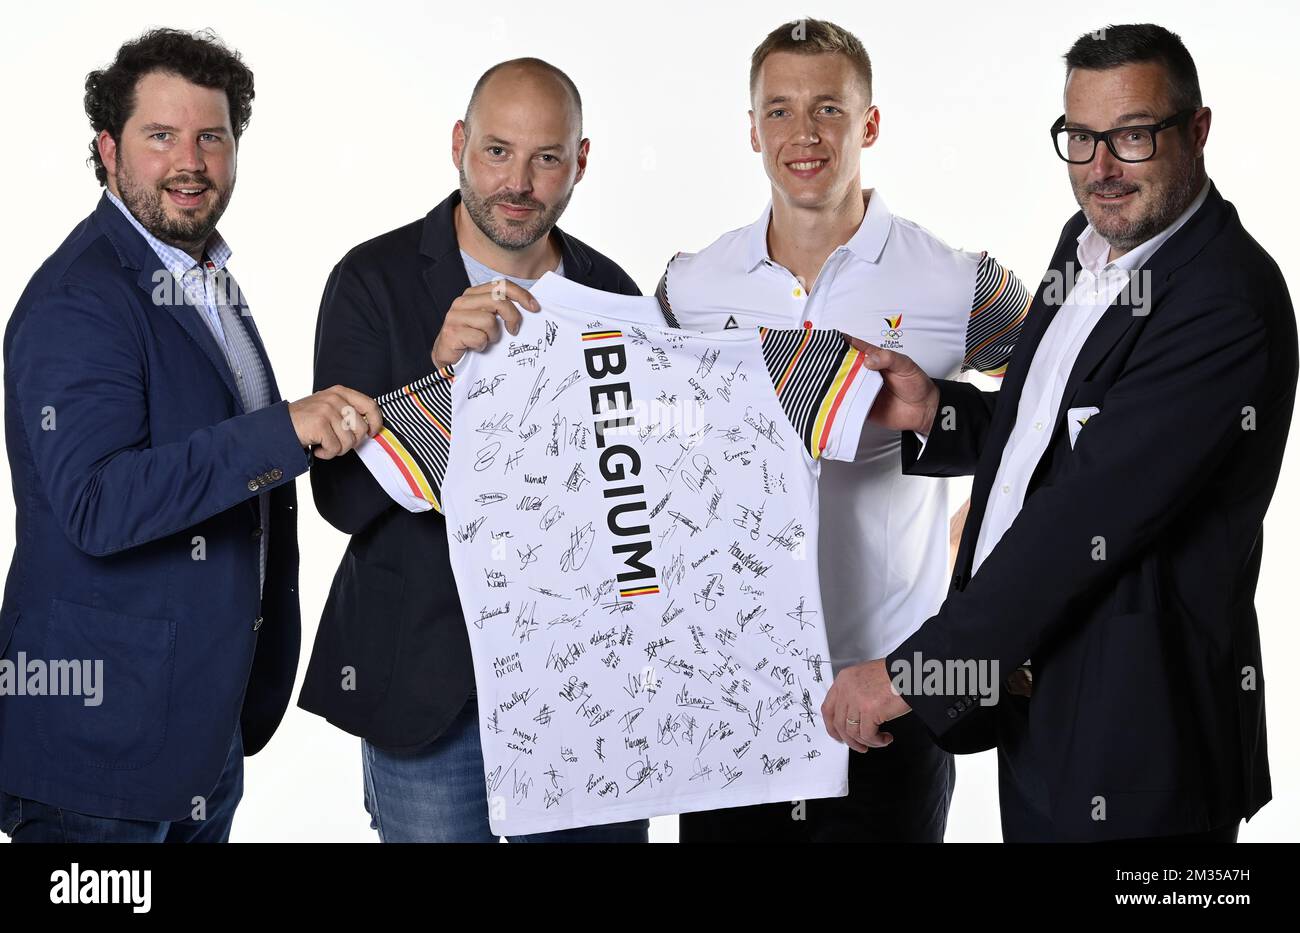 Jerome Paquot, Julien Marchetto of XLG, Belgian Julien Watrin and Dieter Reyntjens pose at a photoshoot for the Belgian Olympic Committee BOIC - COIB ahead of the Tokyo 2020 Olympic Games, in Brussels, Wednesday 07 July 2021. BELGA PHOTO ERIC LALMAND Stock Photo